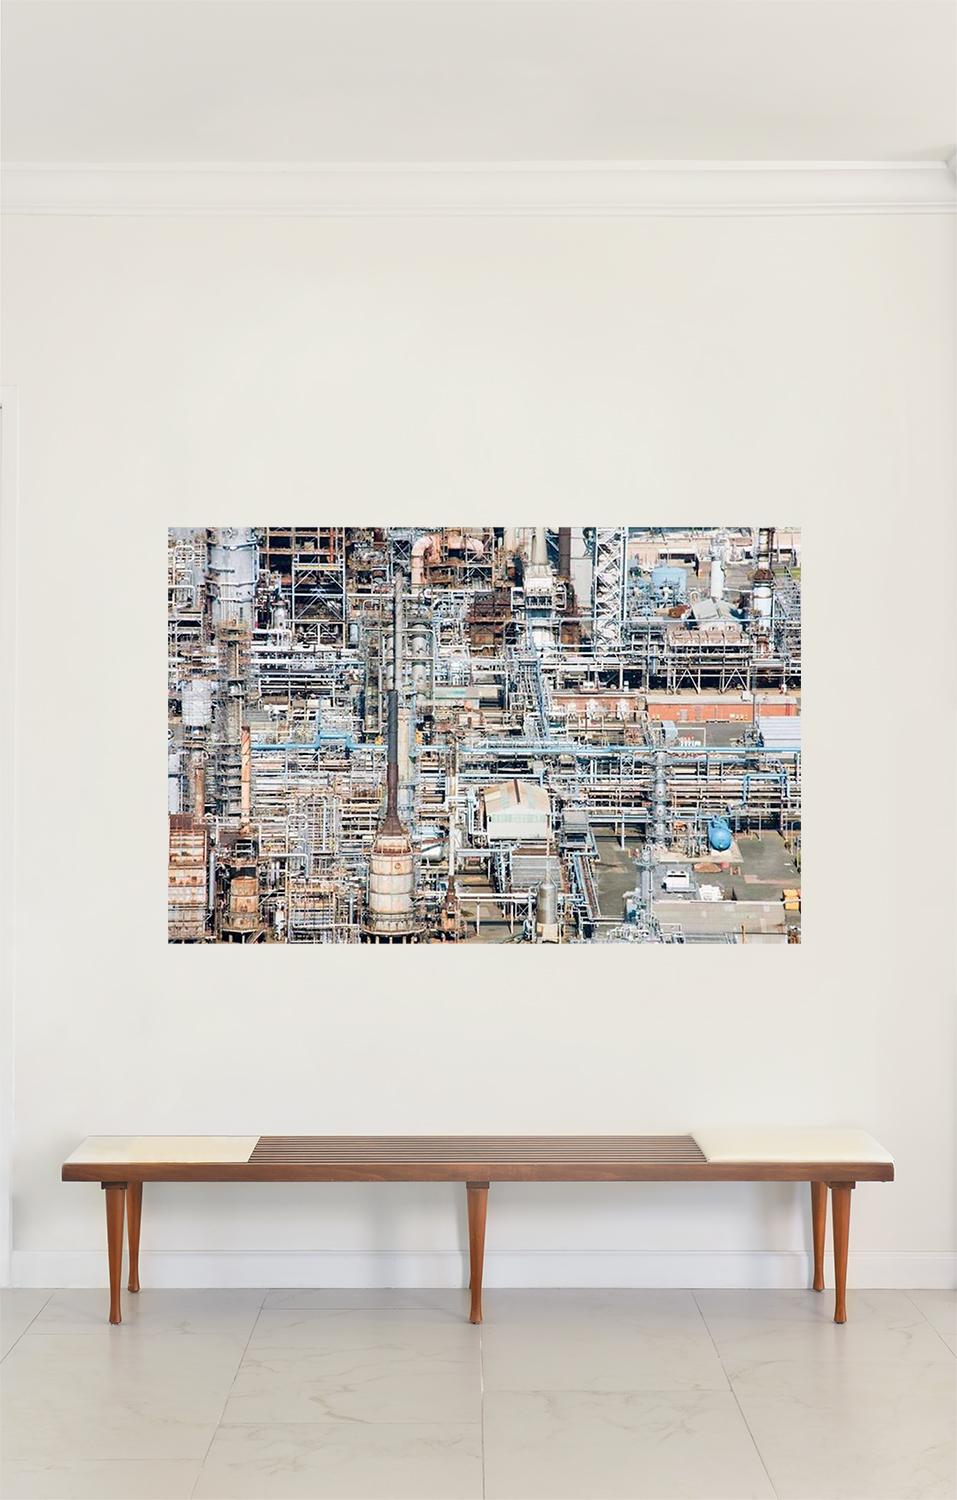 Refinery. Areal limited edition color photograph - Photograph by Jill Peters